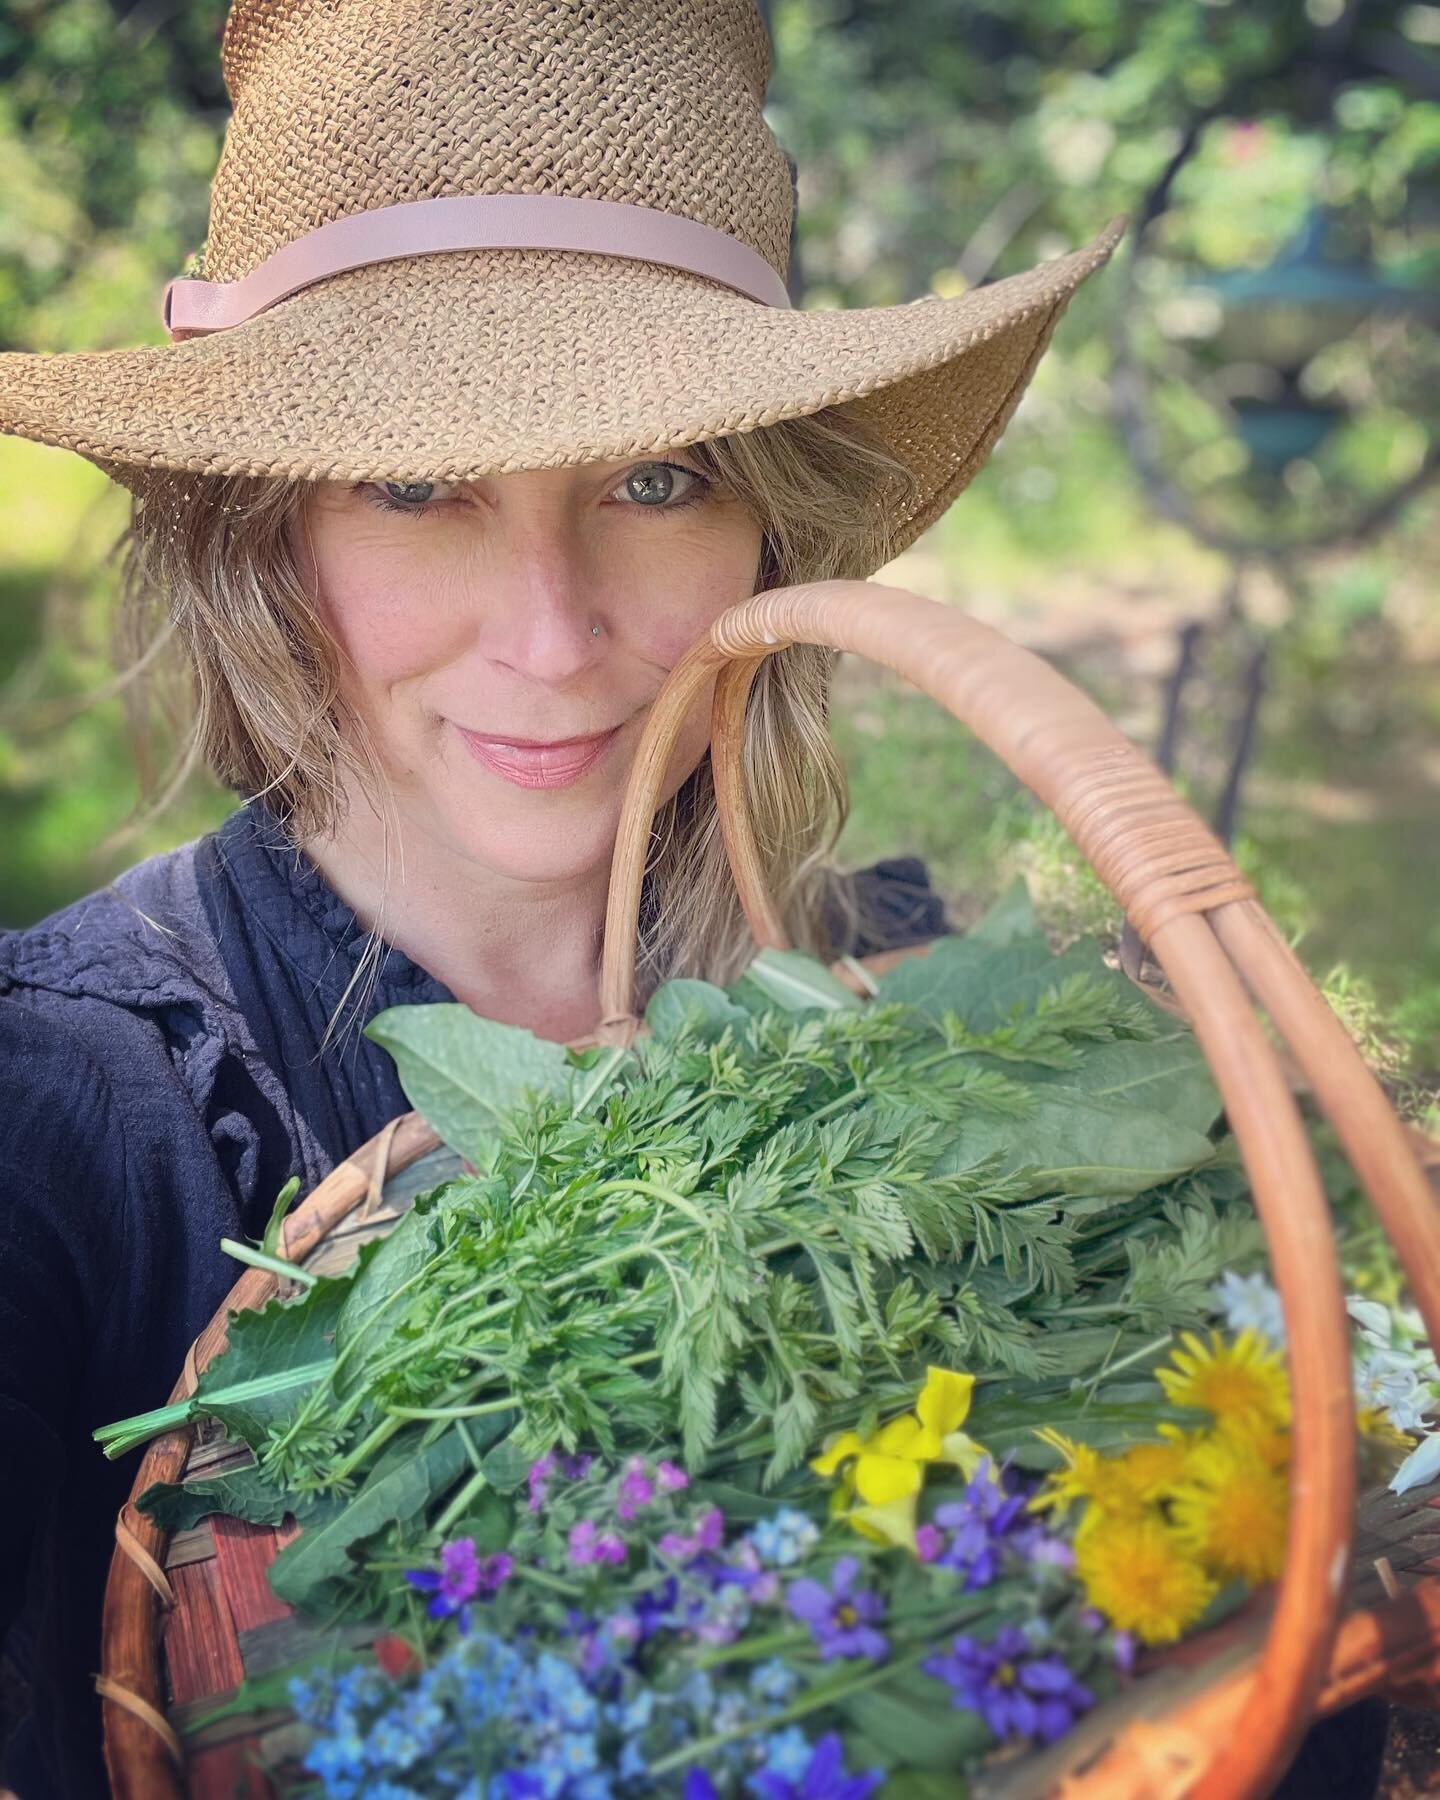 Today we foraged for wild edible flowers in the neighborhood and then baked them into an ancestral bannock oat cake. It was a perfect way to usher in Beltane! #motherrootsvillage #mayday #beltane #ancestralremembrance #theoldways